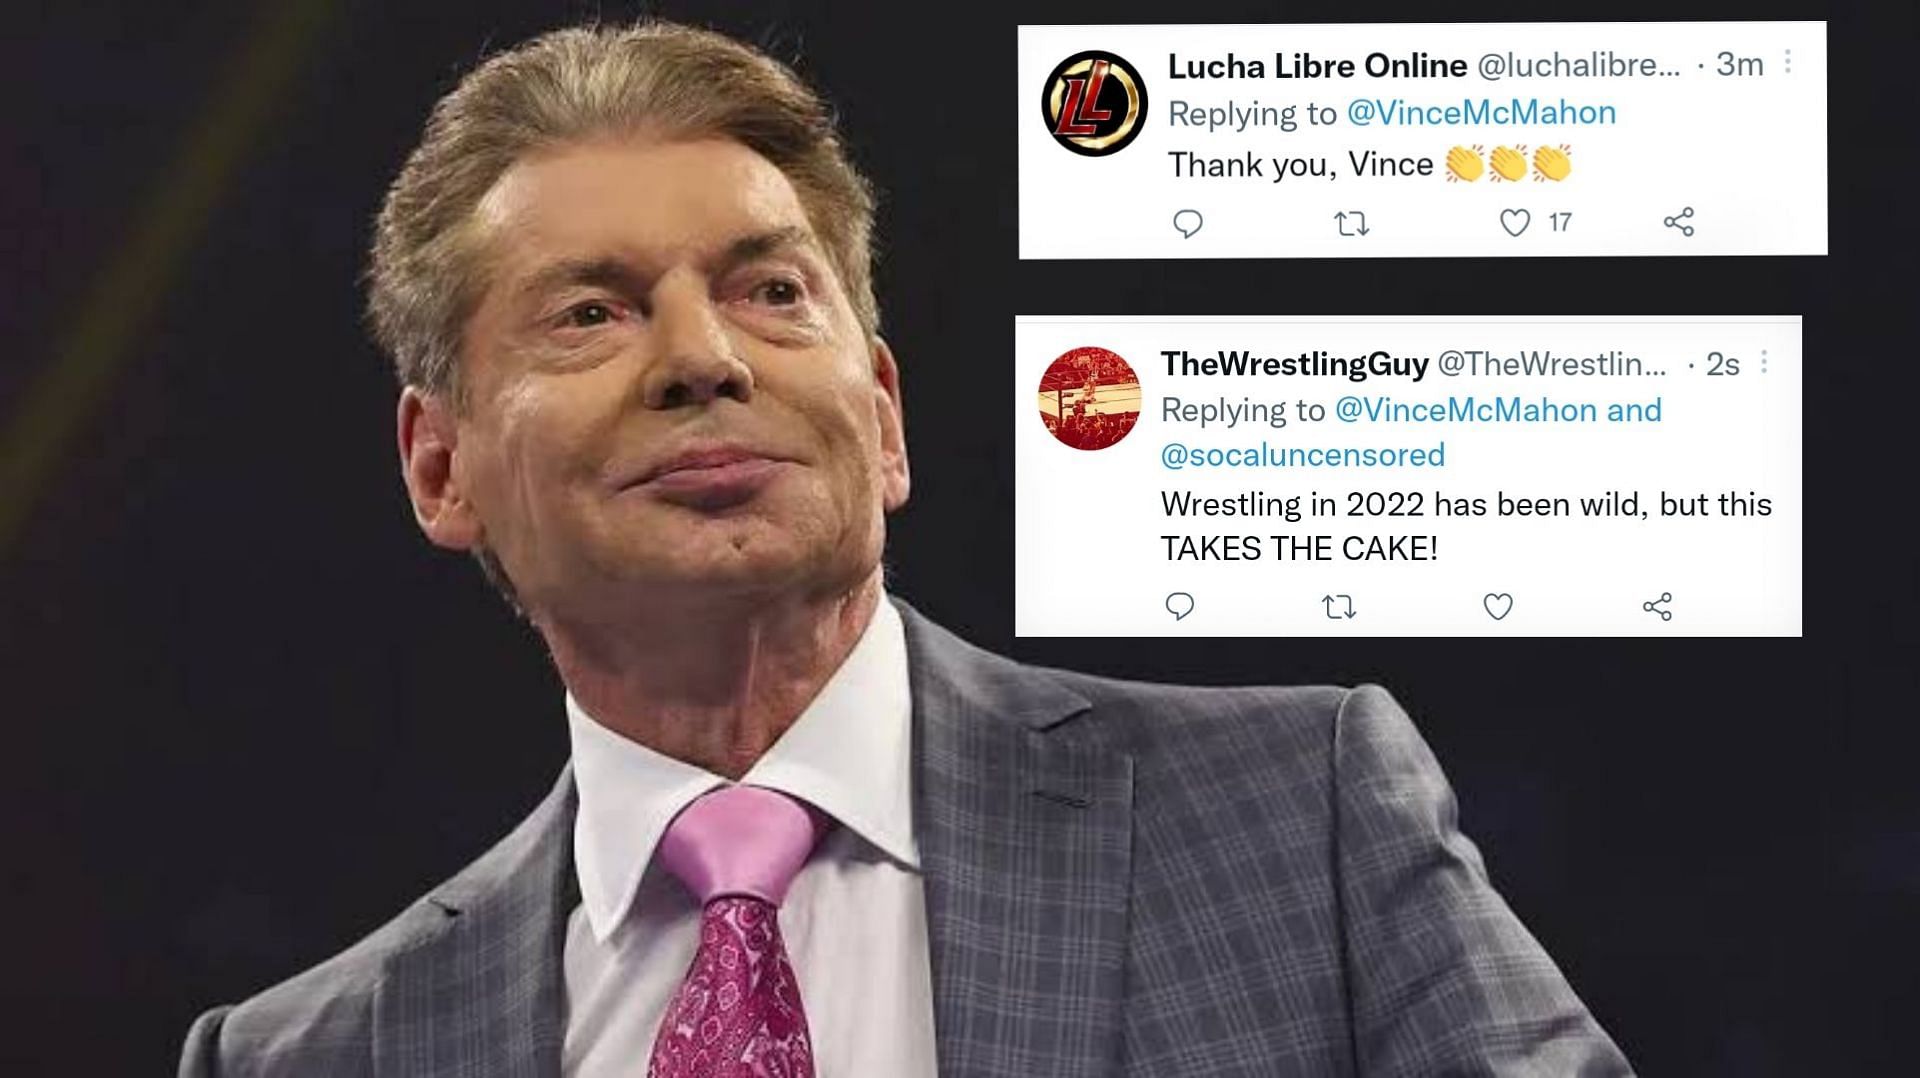 Vince McMahon officially announced his retirement from WWE on 23 July 2022.